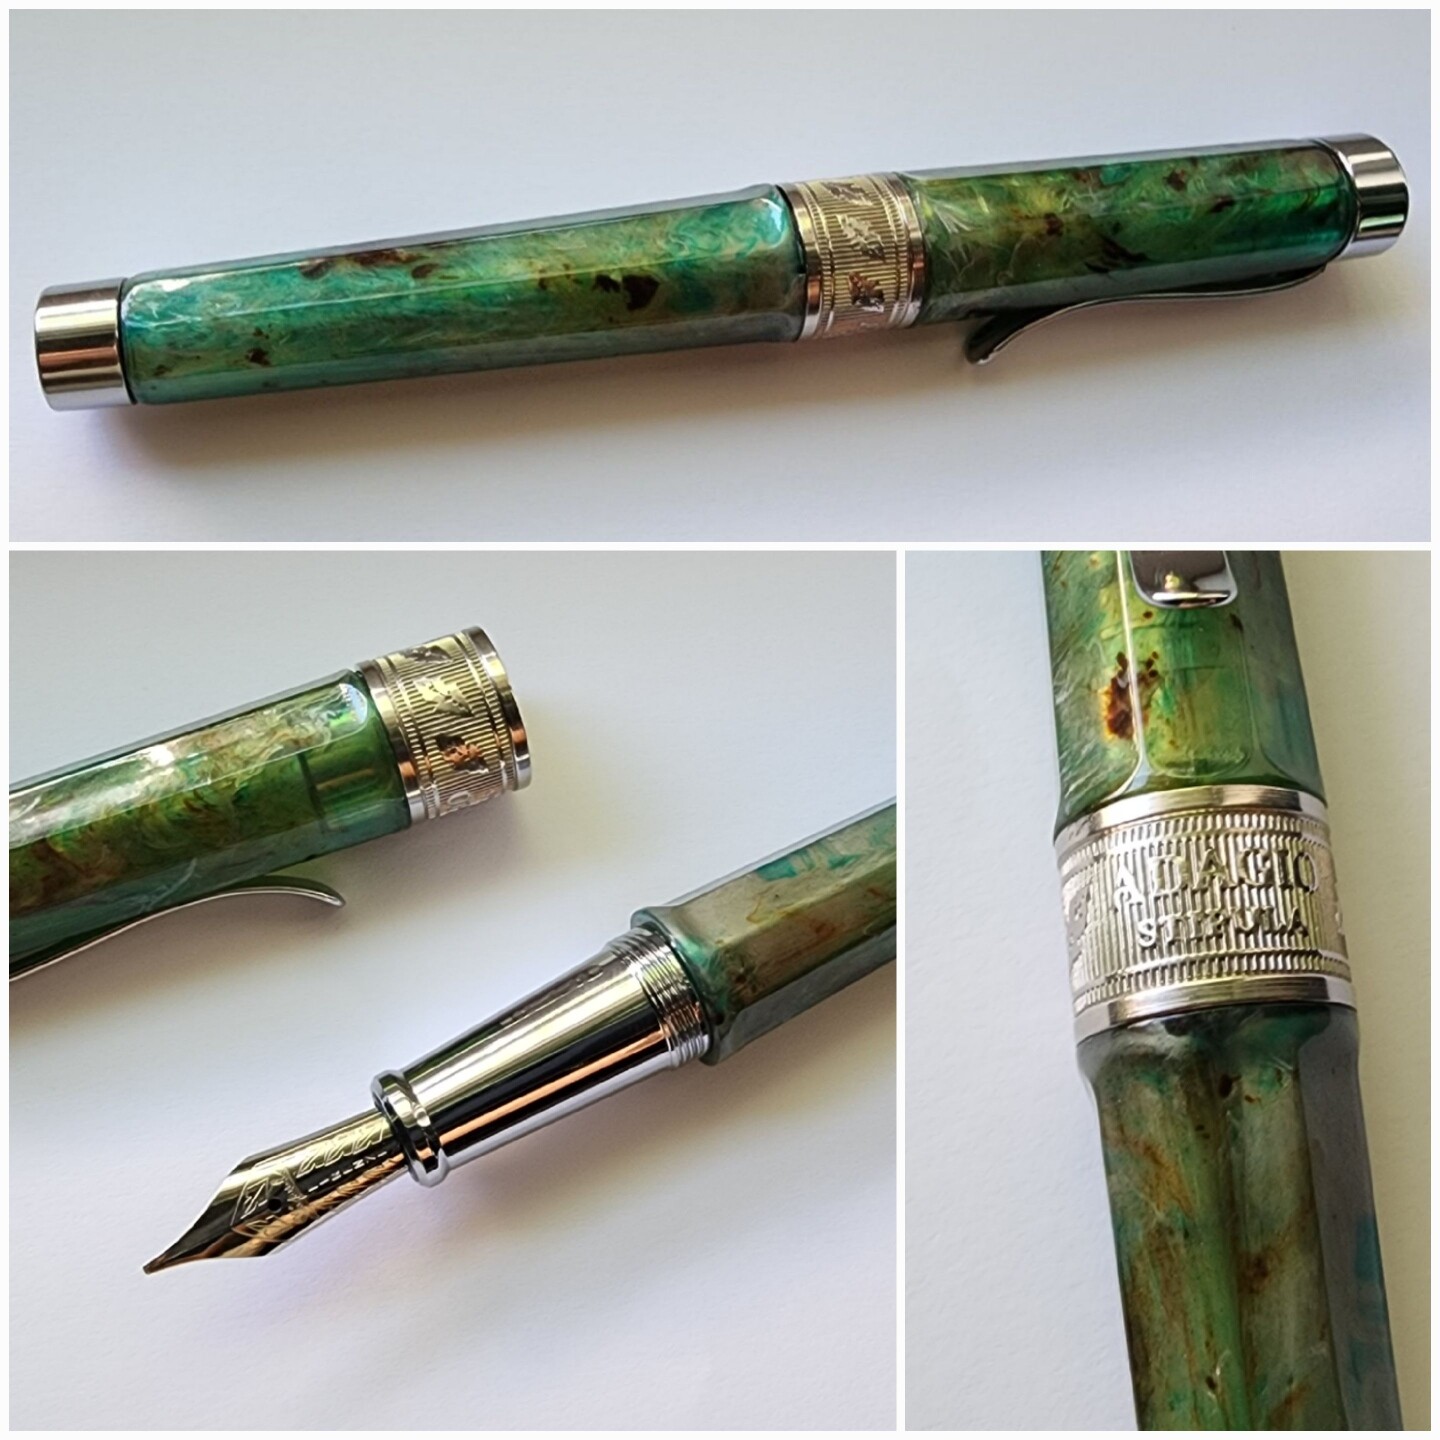 Multiple views of a Stipula Adagio Seaglass fountain pen with a stub nib. The pen has a translucent swirly material with green, blue, brown, and silver colors, a faceted barrel and cap, silver colored metal accents including a wide metal cap band with 